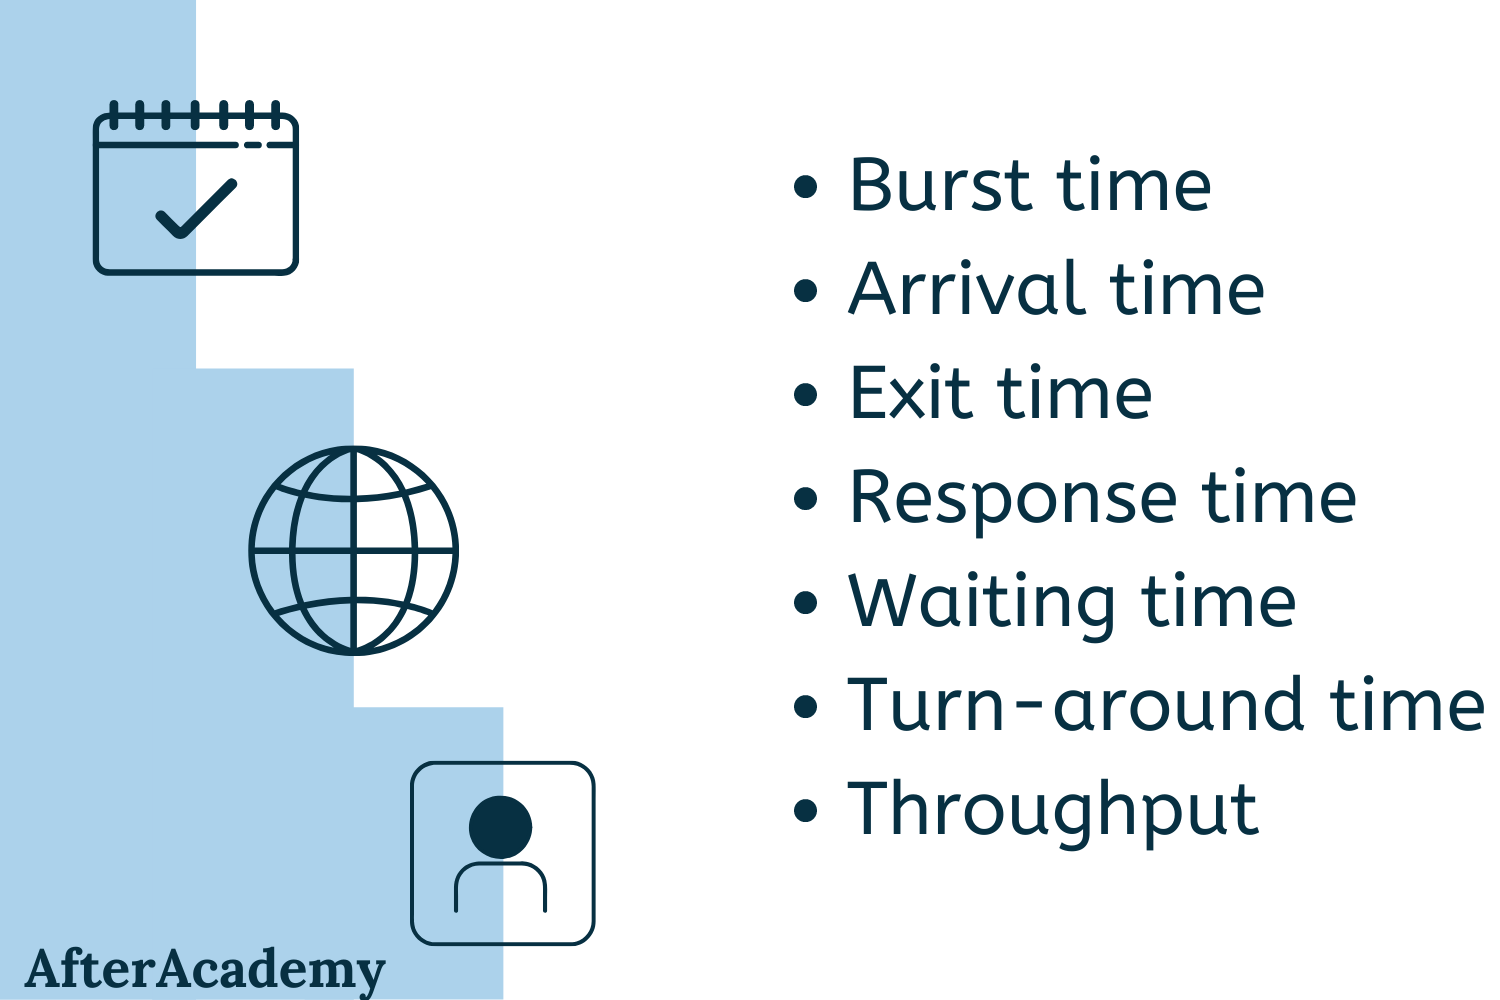 What is Burst time, Arrival time, Exit time, Response time, Waiting time, Turnaround time, and Throughput?